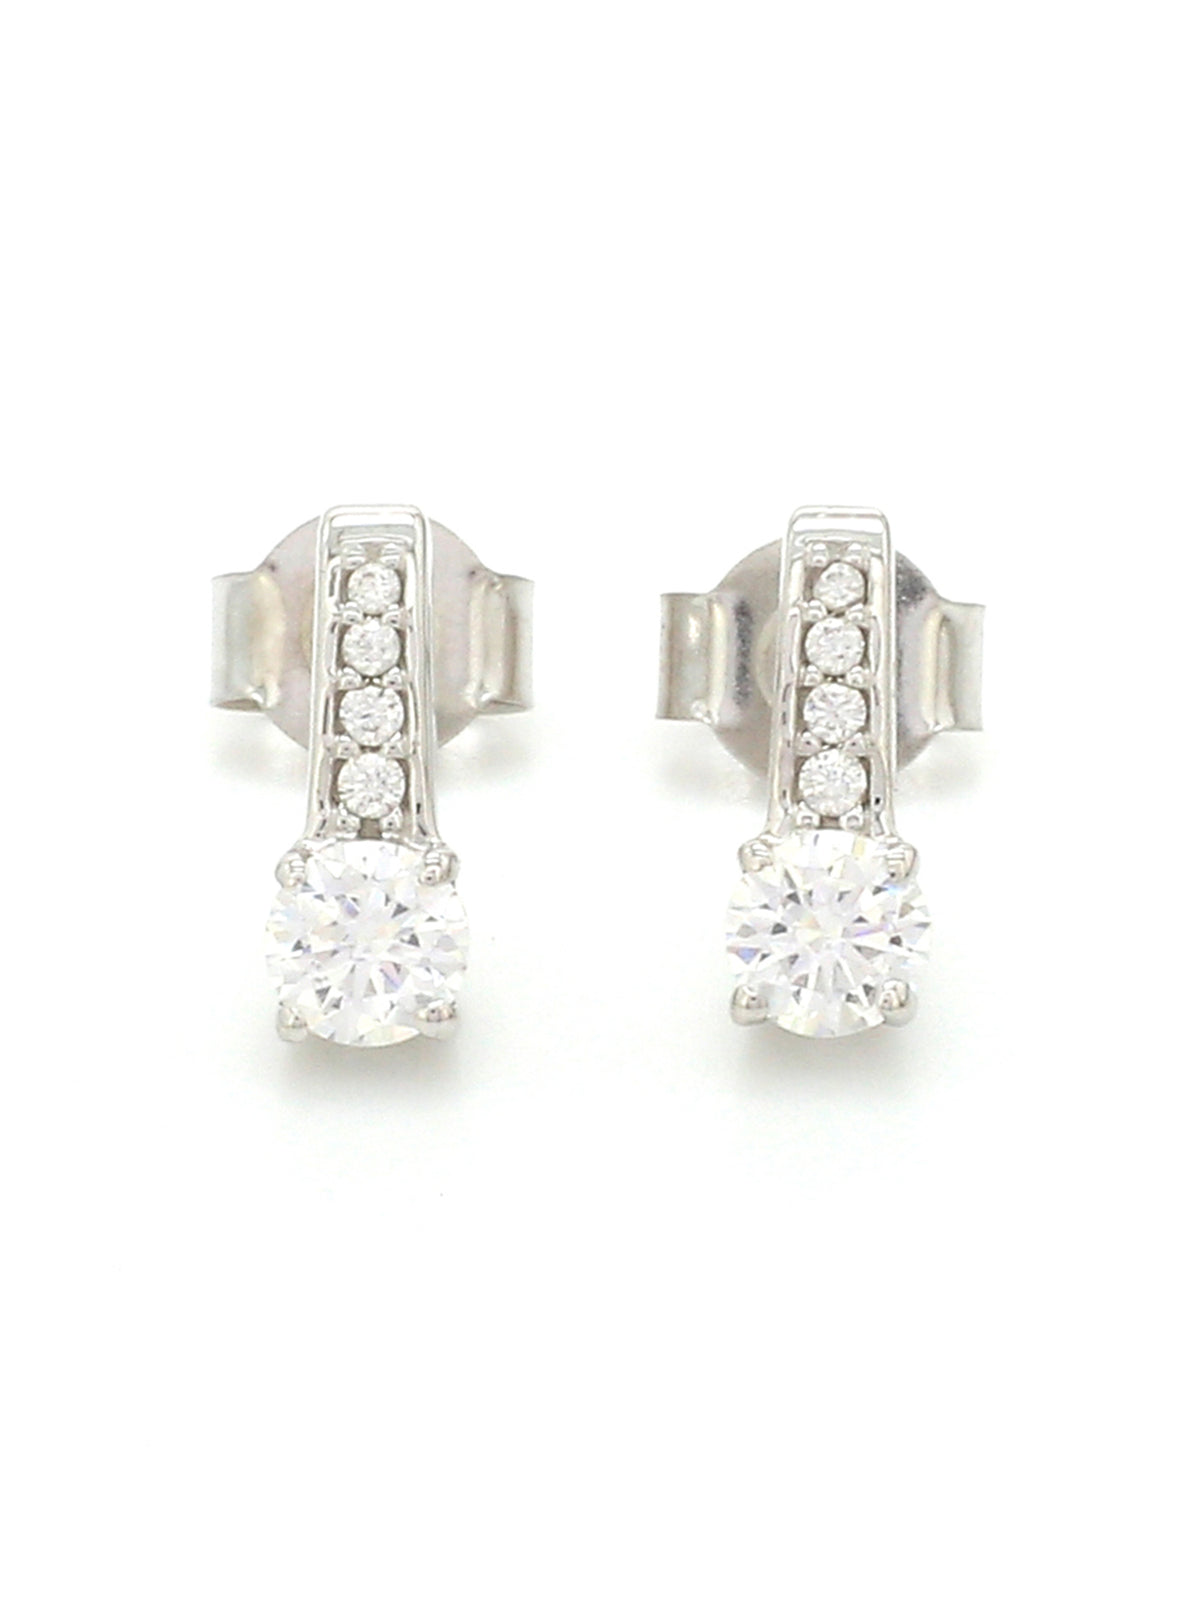 ORNATE 0.50 CARAT SOLITAIRE DANGLE STYLE PURE SILVER EARRINGS FOR WOMEN